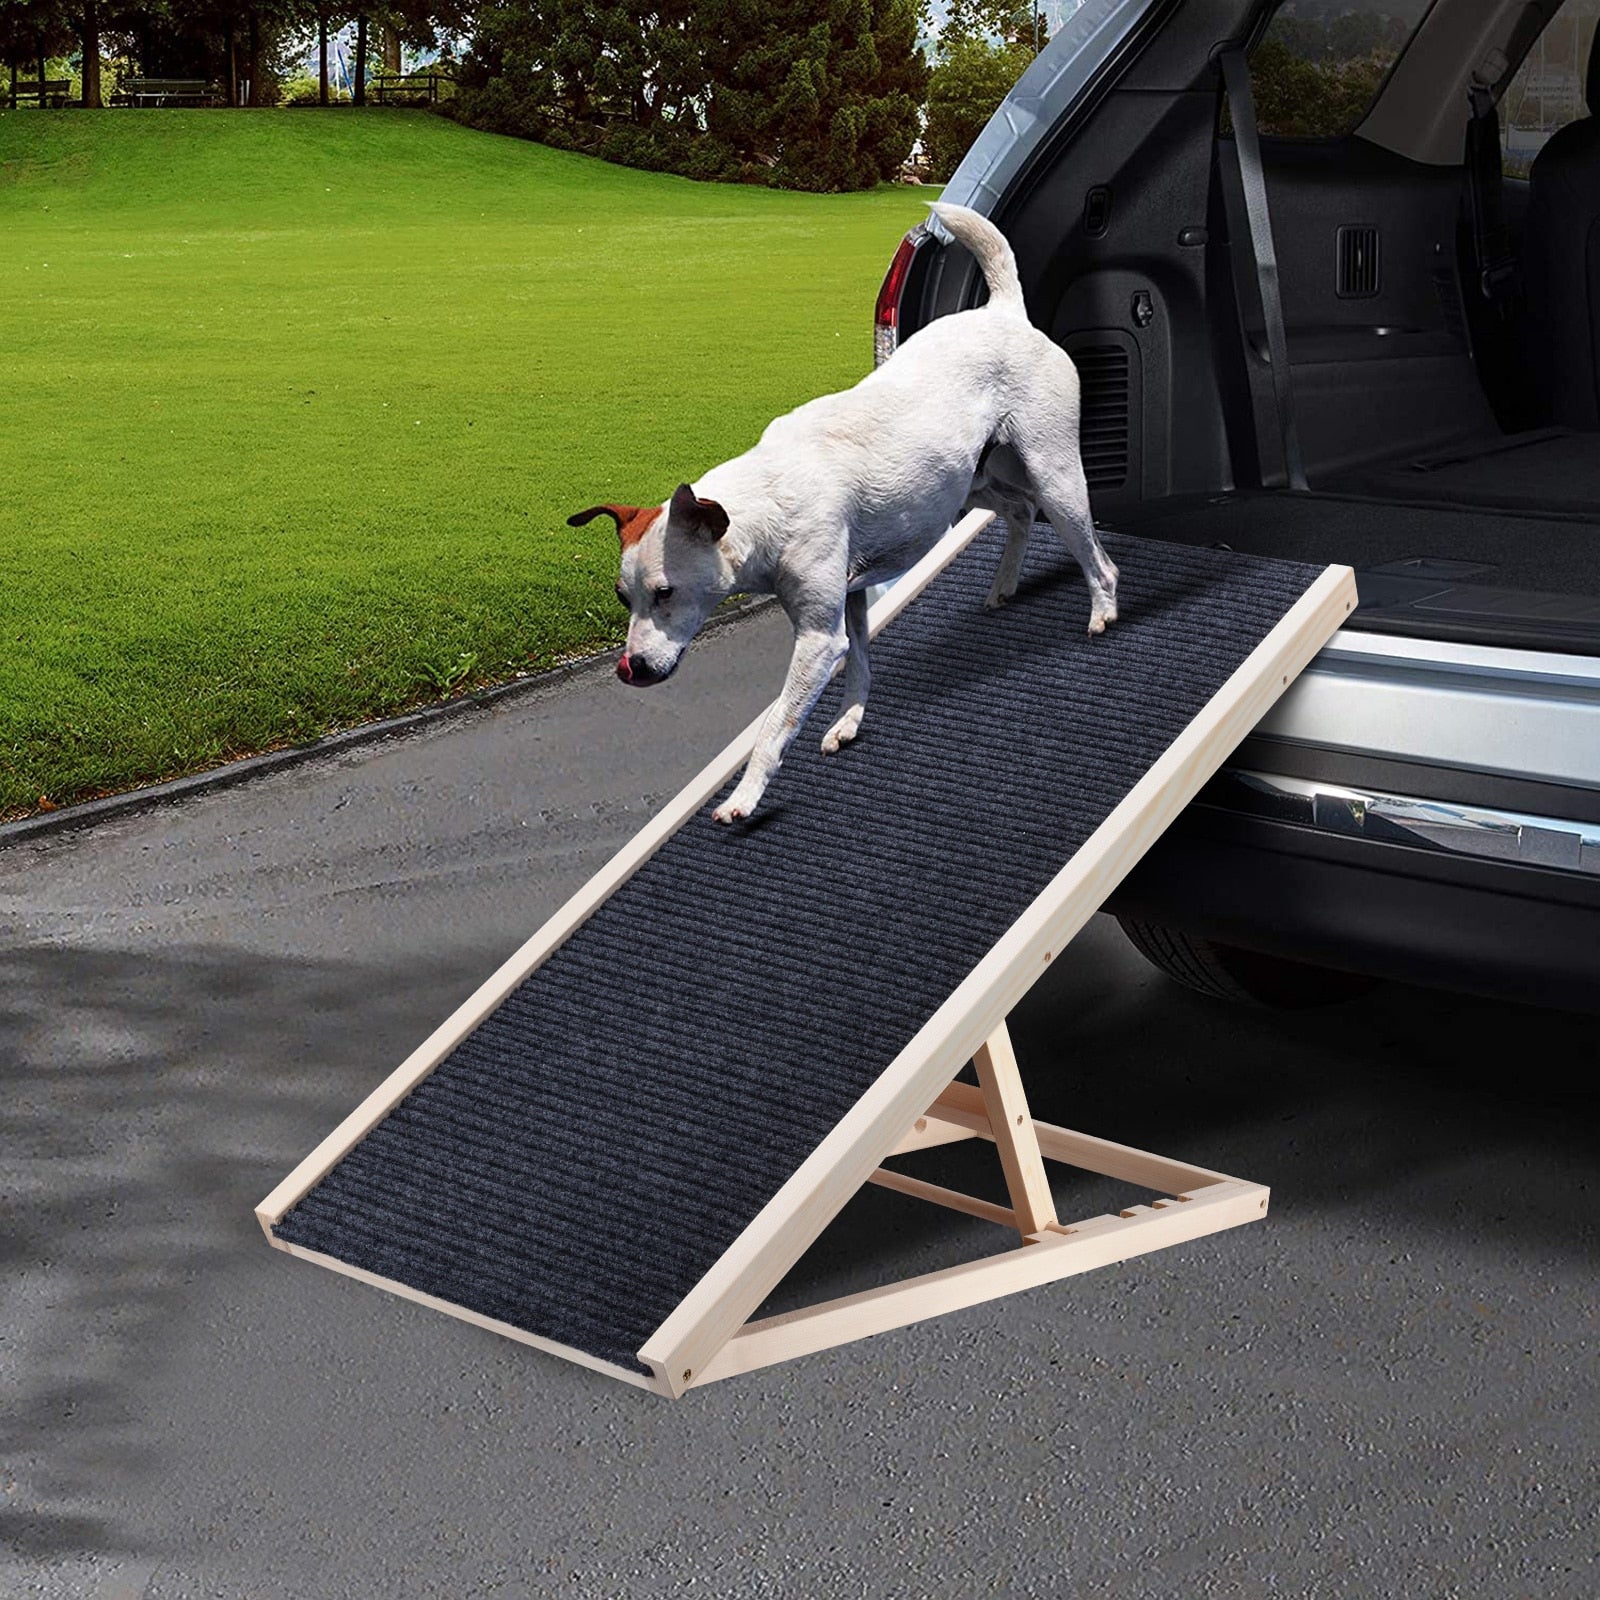 Portable Dog Car Step Stairs Ramp Ladder Support Up To 110lb Non-Slip Carpet Surface Adjustable Heights Pets Ramp For Dogs Cats - DreamWeaversStore